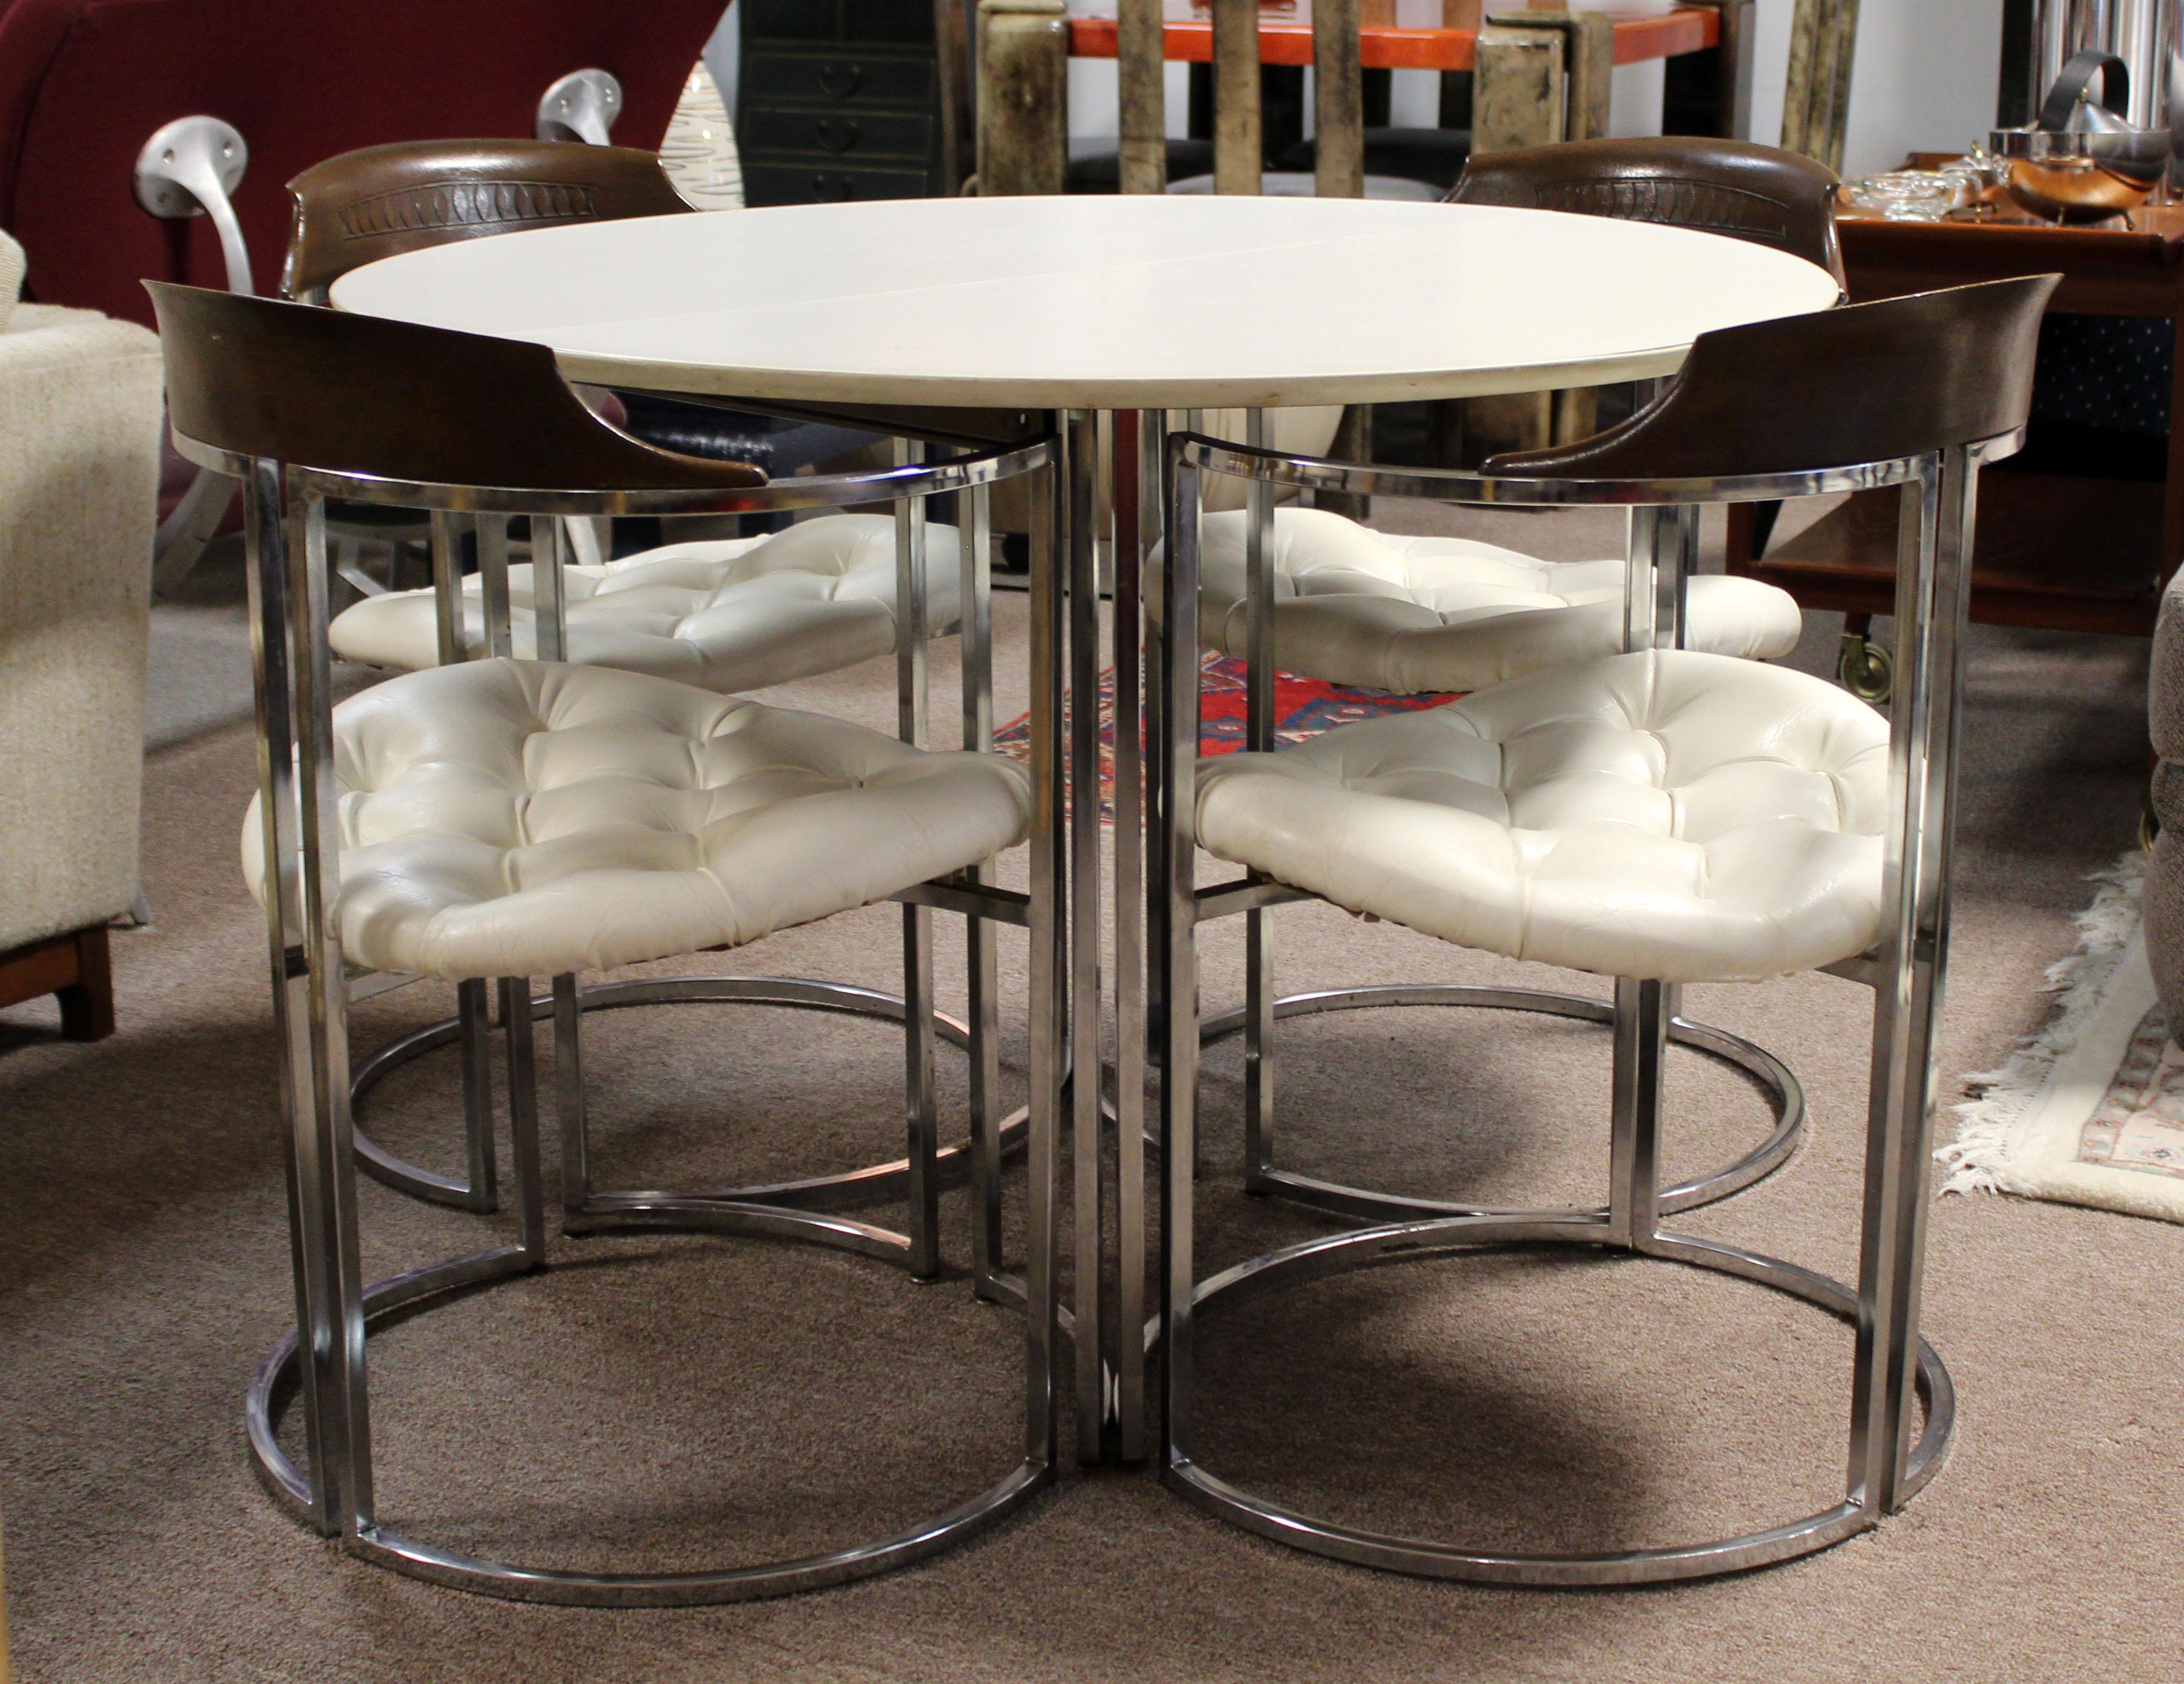 For your consideration is a magnificent dinette set, including a table made of chrome and with a white laminate top, with one leaf, and four chairs made of chrome, wood and white leather, by Daystrom, circa the 1970s. In very good condition.